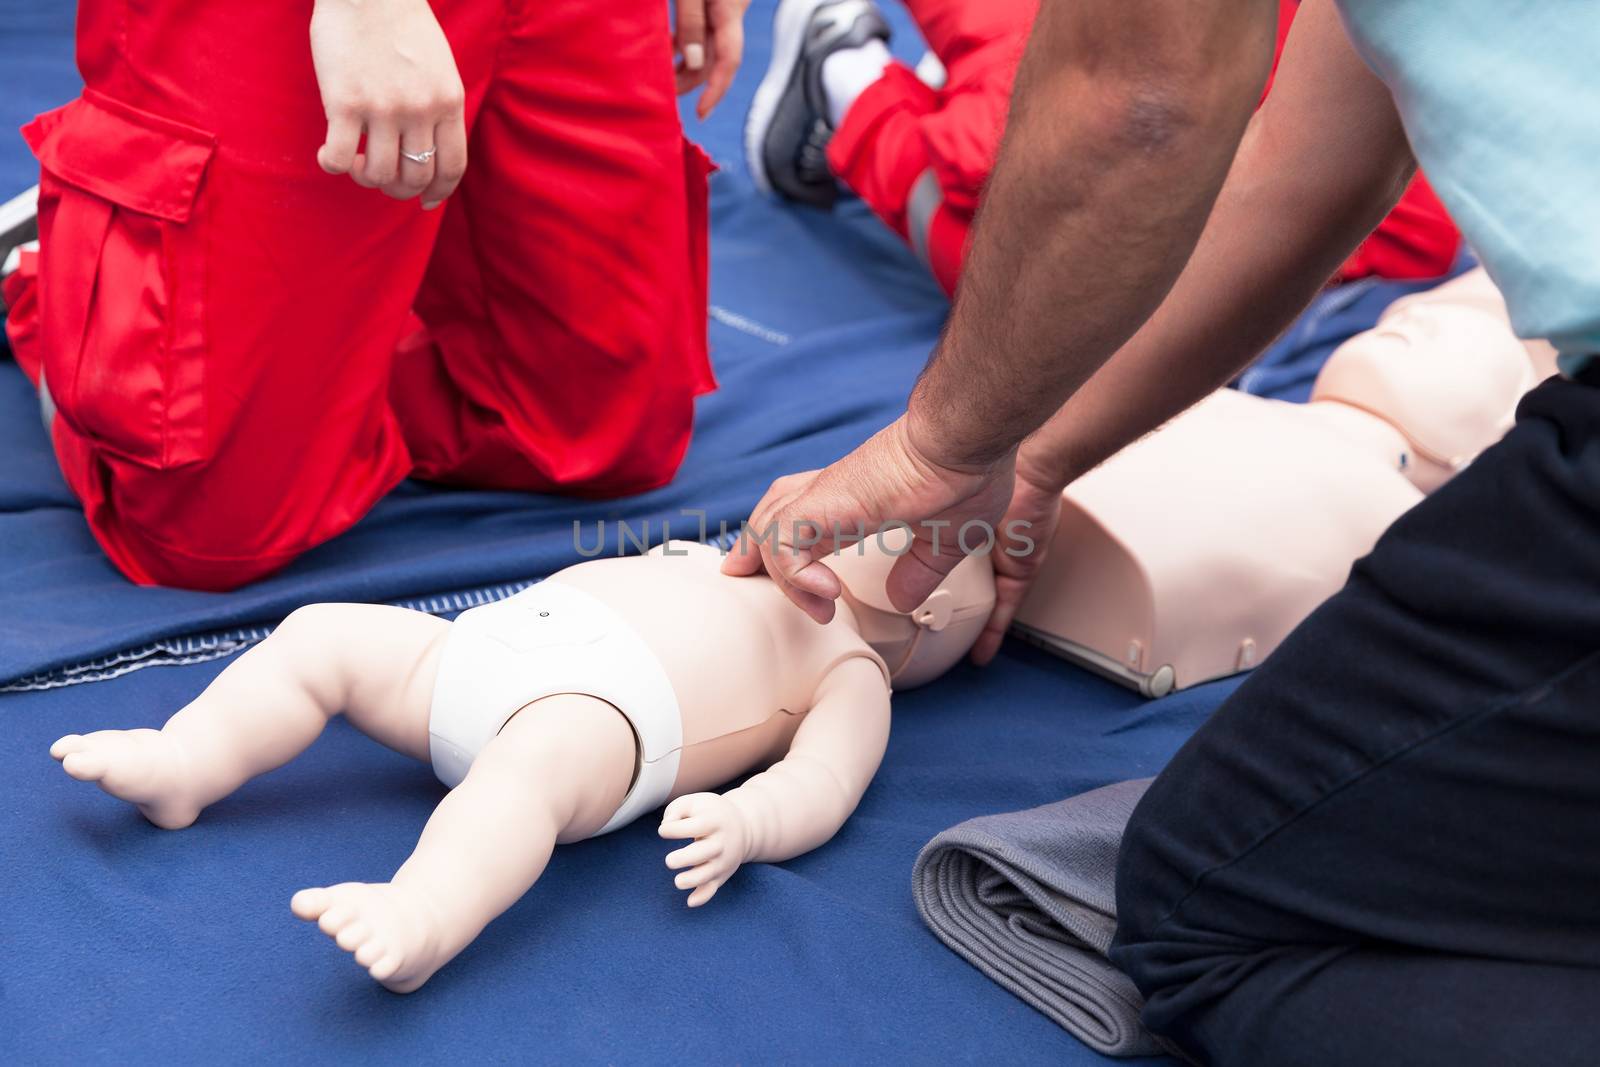  First aid training course by wellphoto